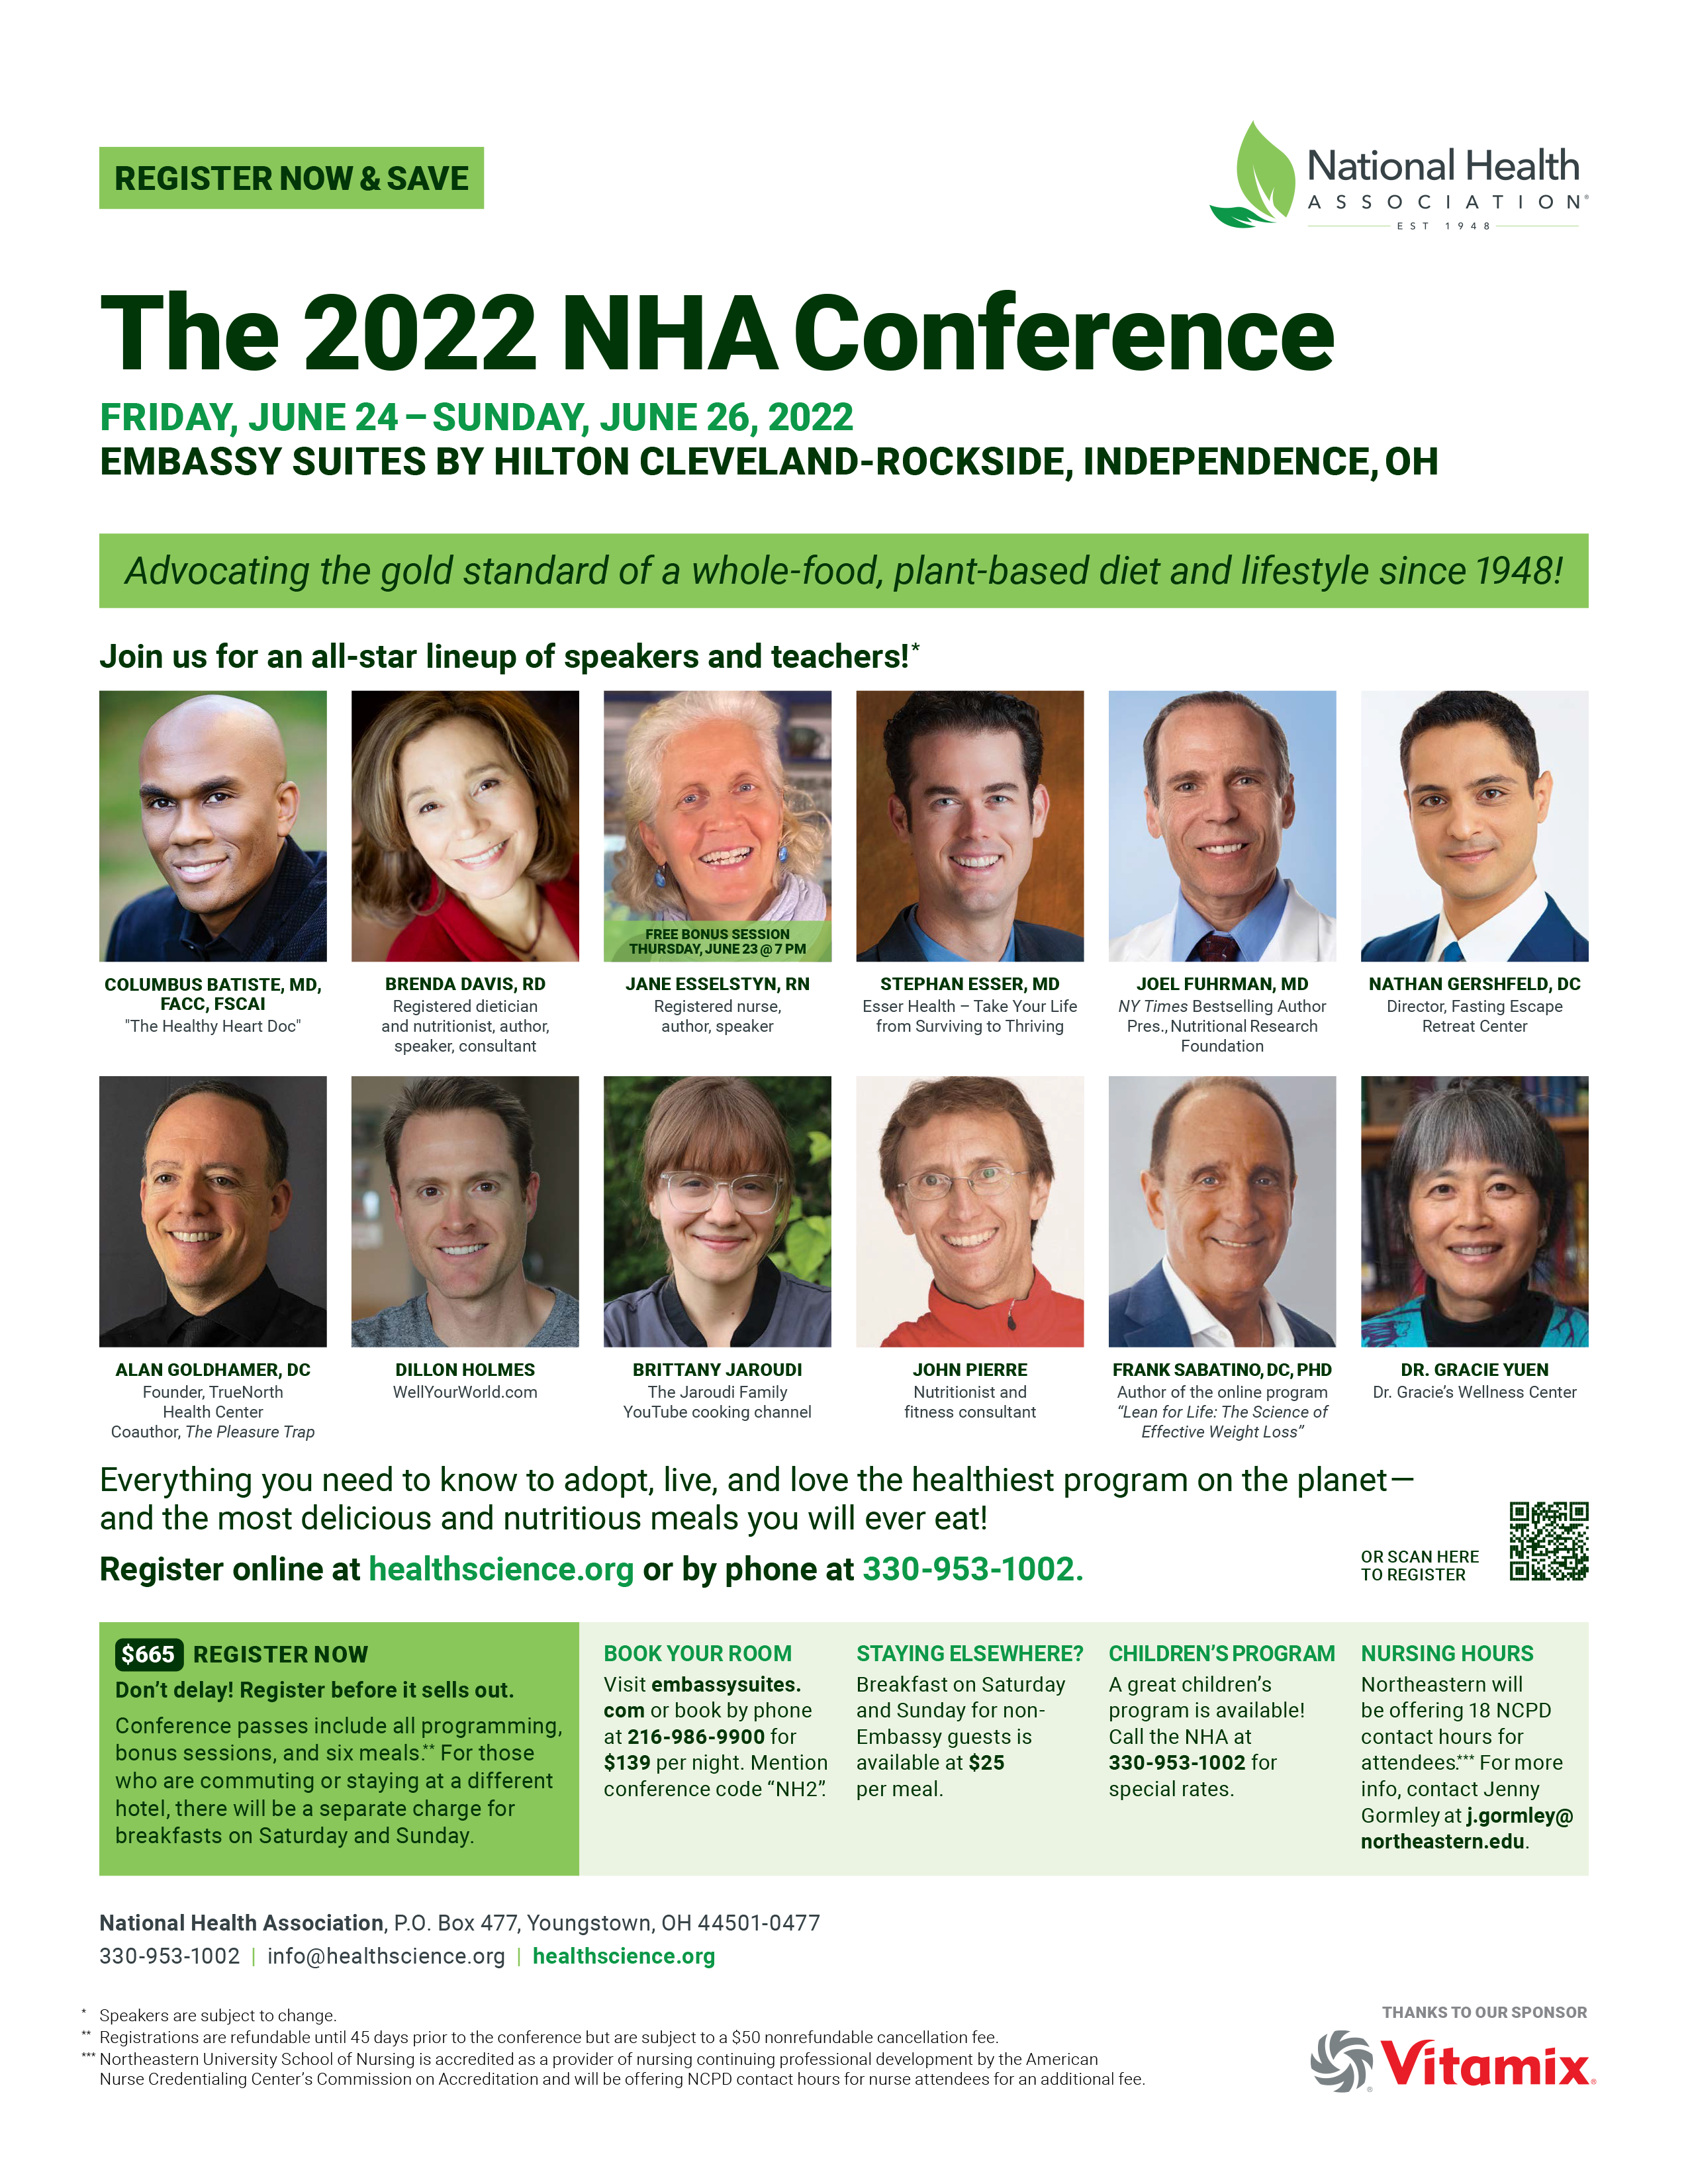 Current Campaign: Help Support the 2022 NHA Conference